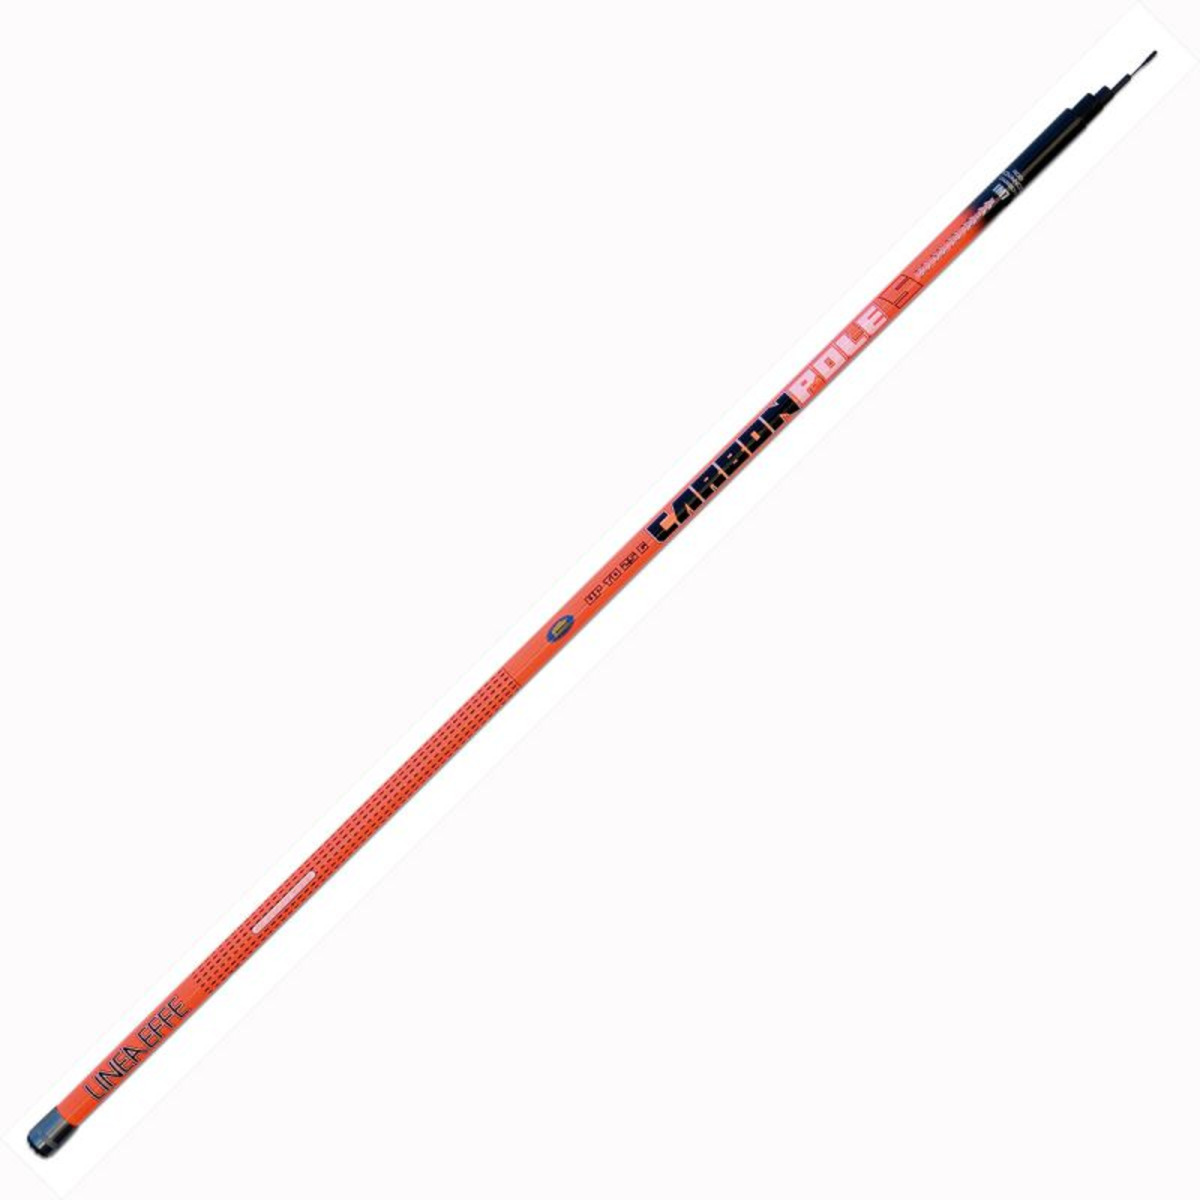 Lineaeffe Carbon Pole - 5.00 m - up to 25 g